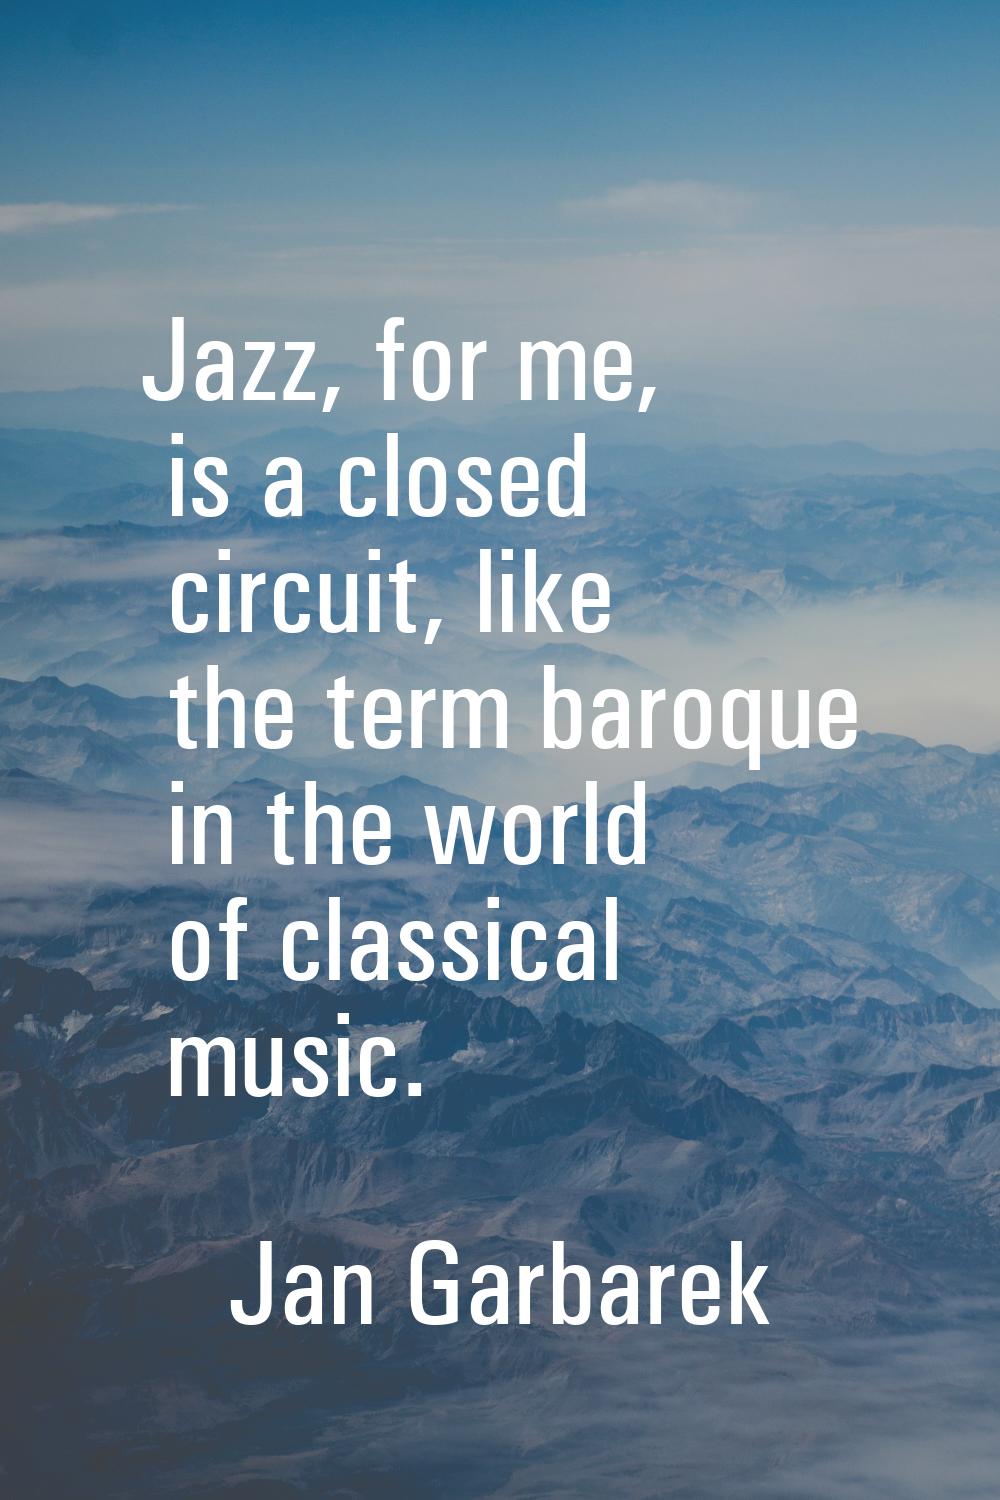 Jazz, for me, is a closed circuit, like the term baroque in the world of classical music.